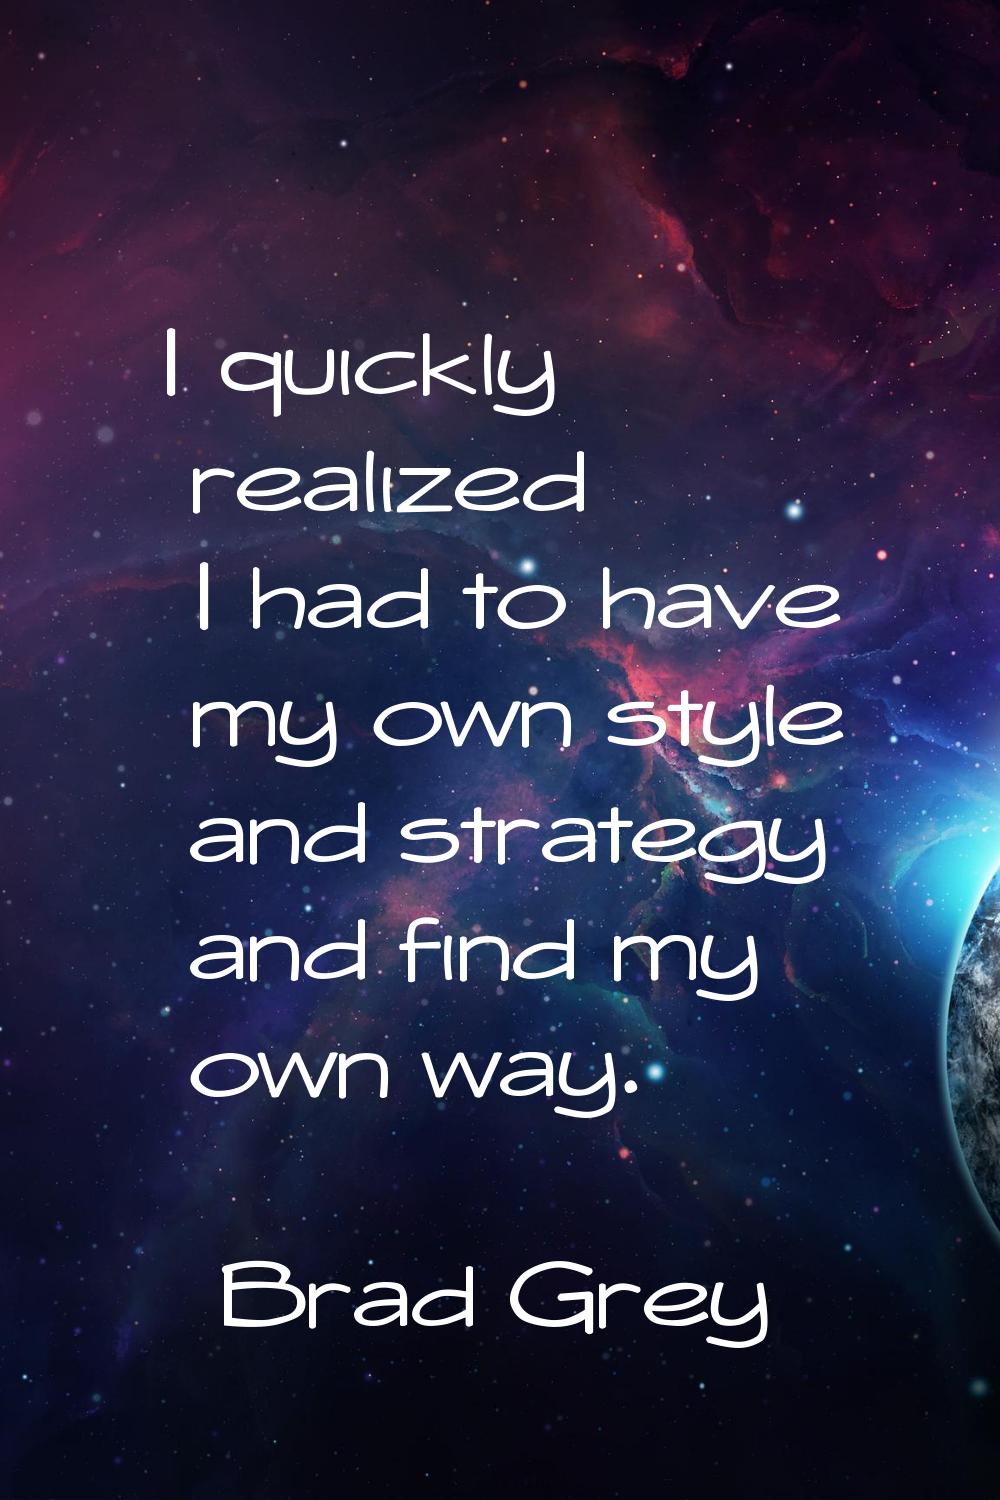 I quickly realized I had to have my own style and strategy and find my own way.